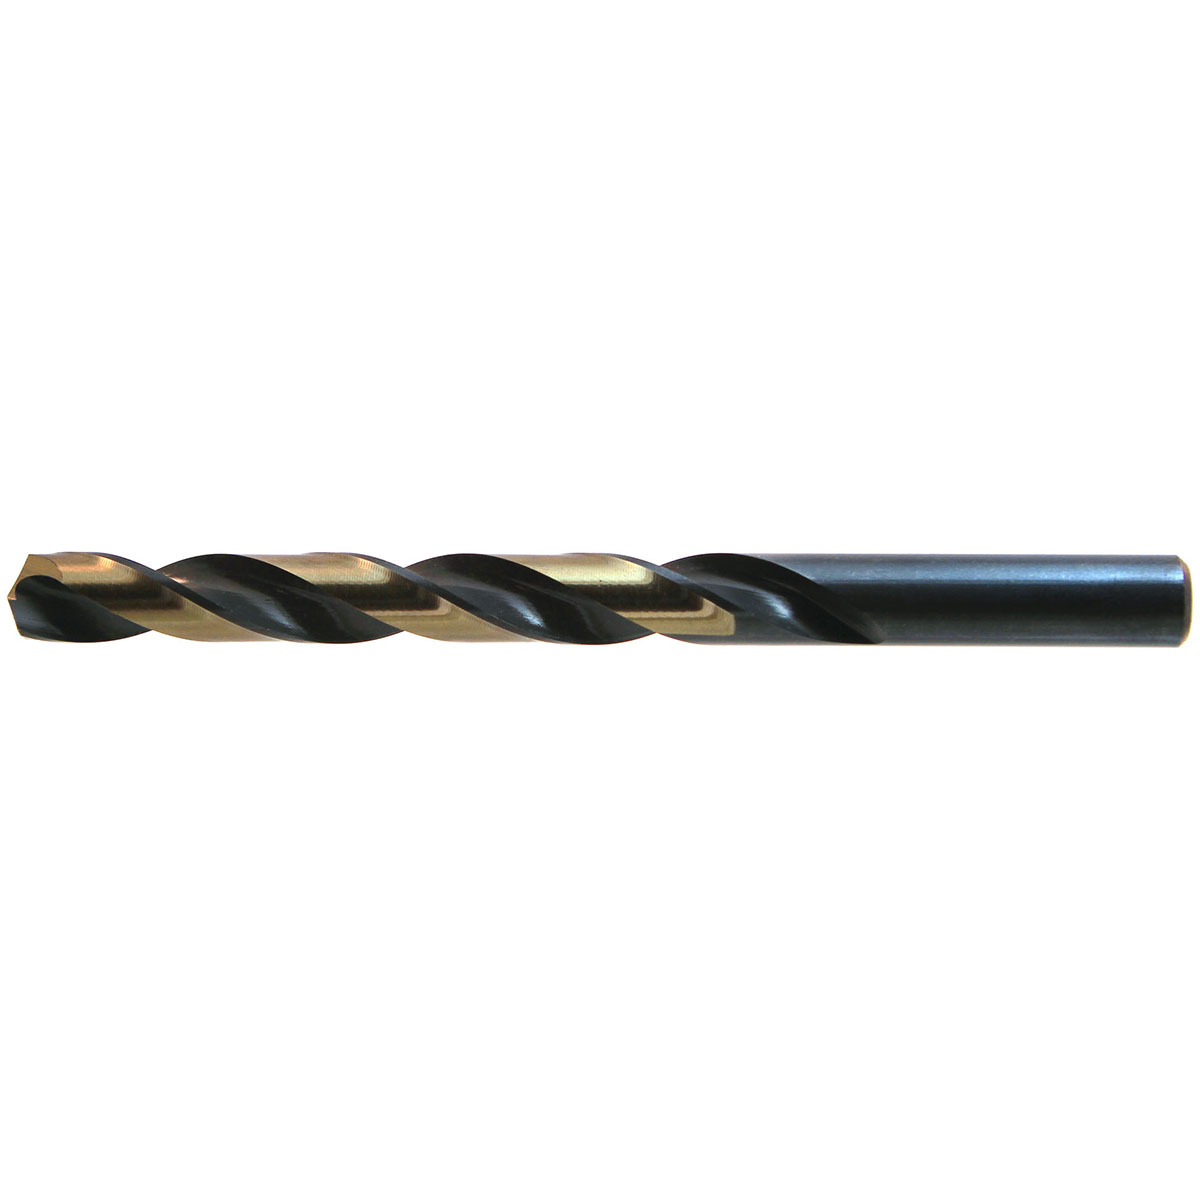 Drillco Nitro Series 400N 3/16 X 3 1/2 Black and Gold Oxide HSS General Purpose Heavy Duty Jobber Length Drill Bit with Straight Shank and 2 5/16 Spiral Flute 12 Each/Pack 